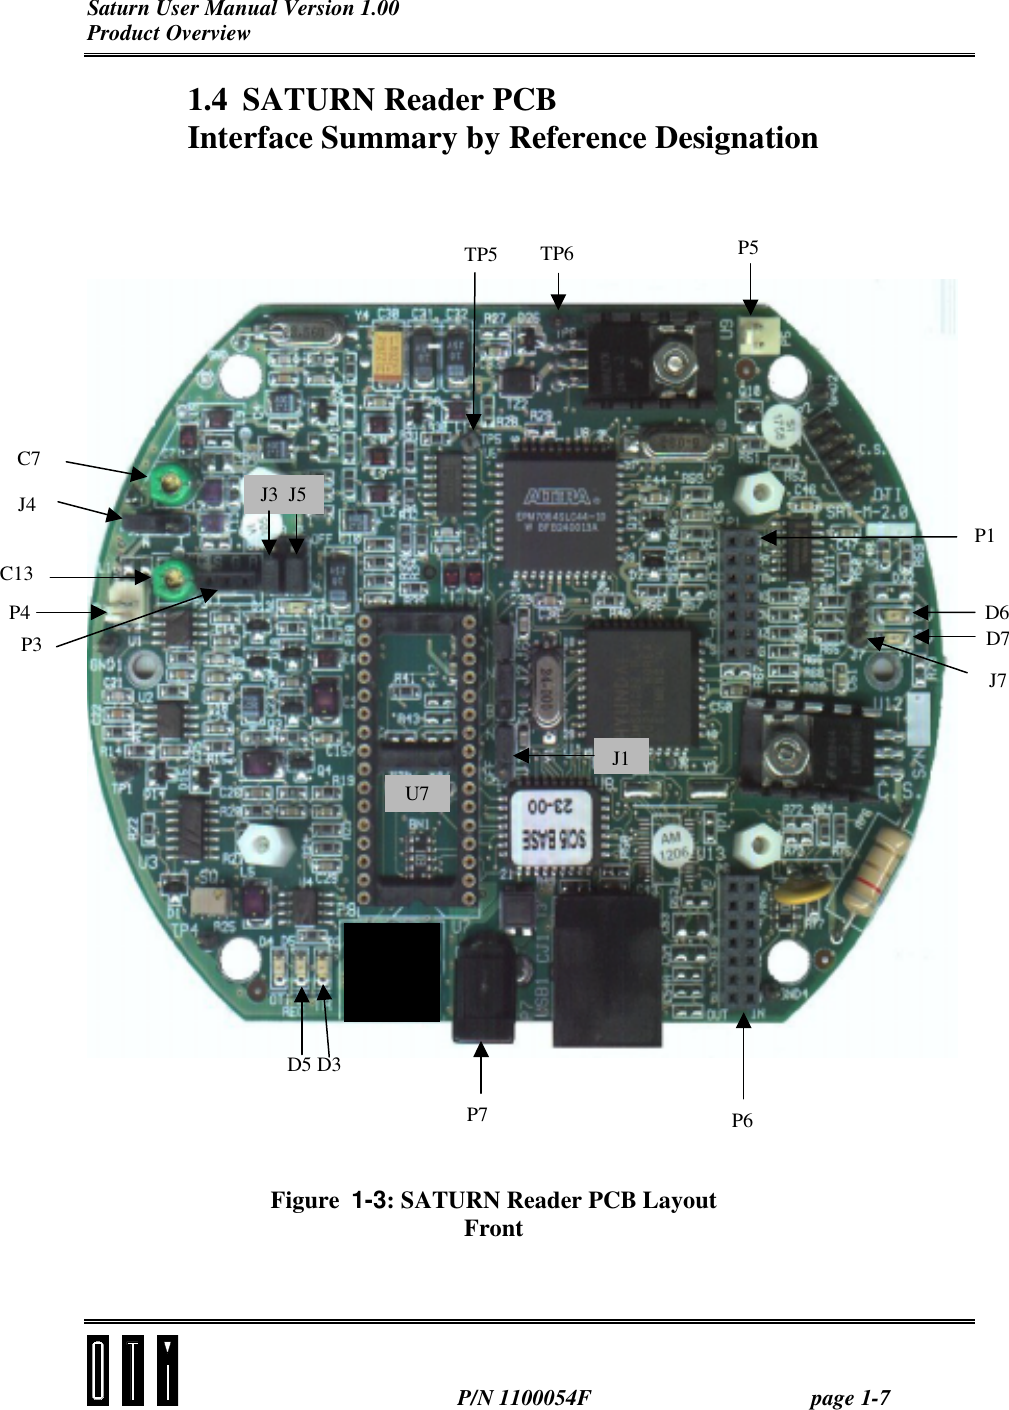 Saturn User Manual Version 1.00 Product Overview  P/N 1100054F page 1-7 1.4 SATURN Reader PCB Interface Summary by Reference Designation      Figure  1-3: SATURN Reader PCB Layout Front C7 C13 J4 P3 D5 D3 P7  P6 D7 D6 P1 J7 P5 TP5 J1J3  J5 P4 TP6 U7 